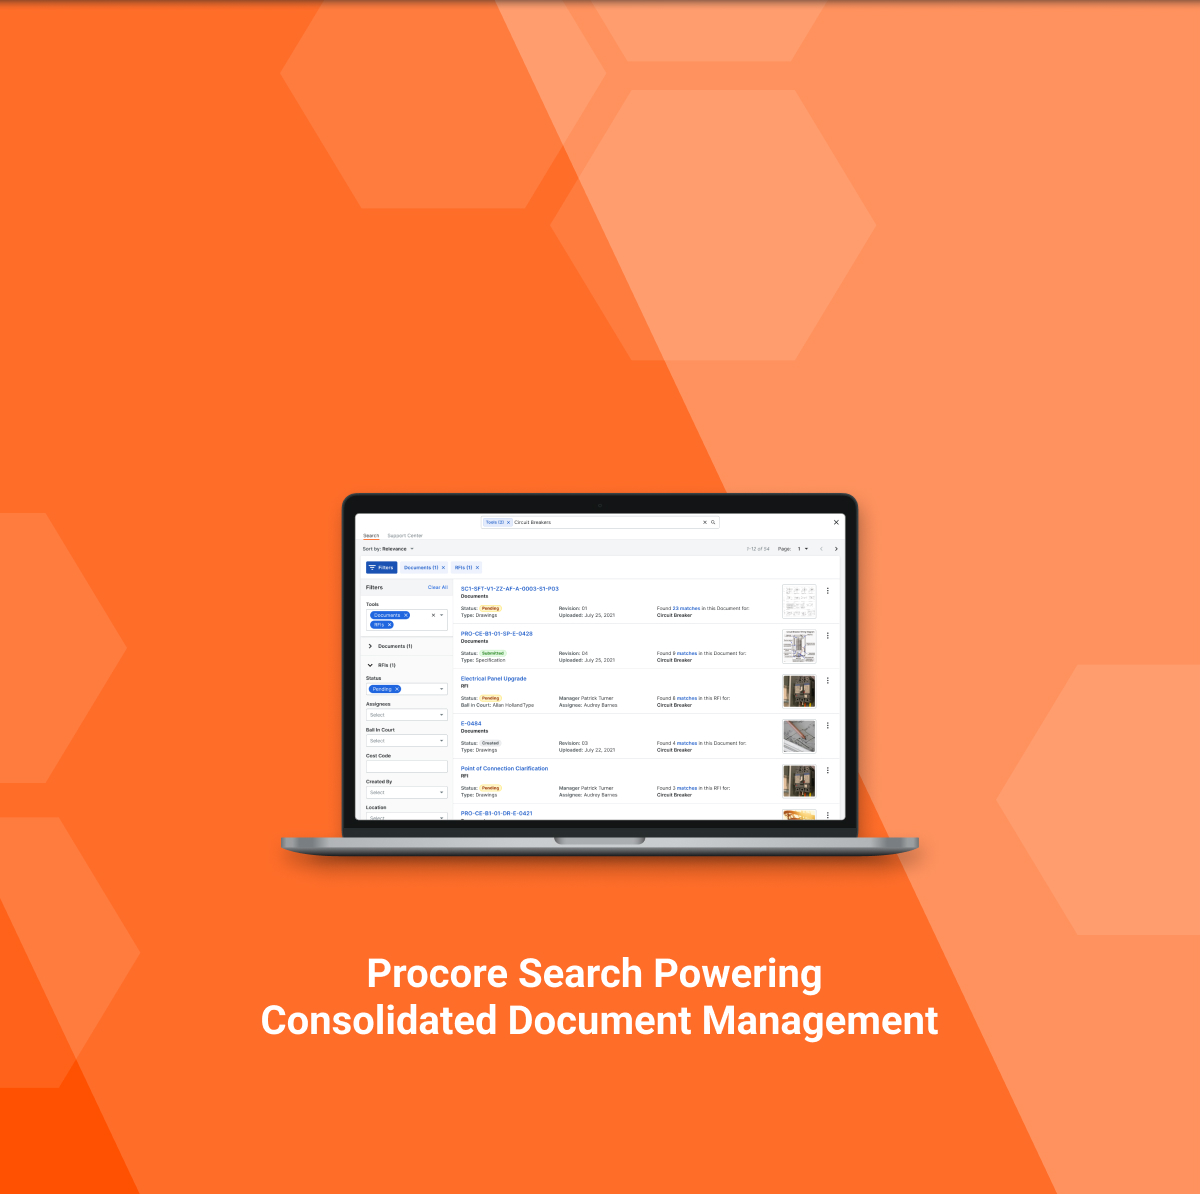 Procore Search Powering Consolidated Document Management